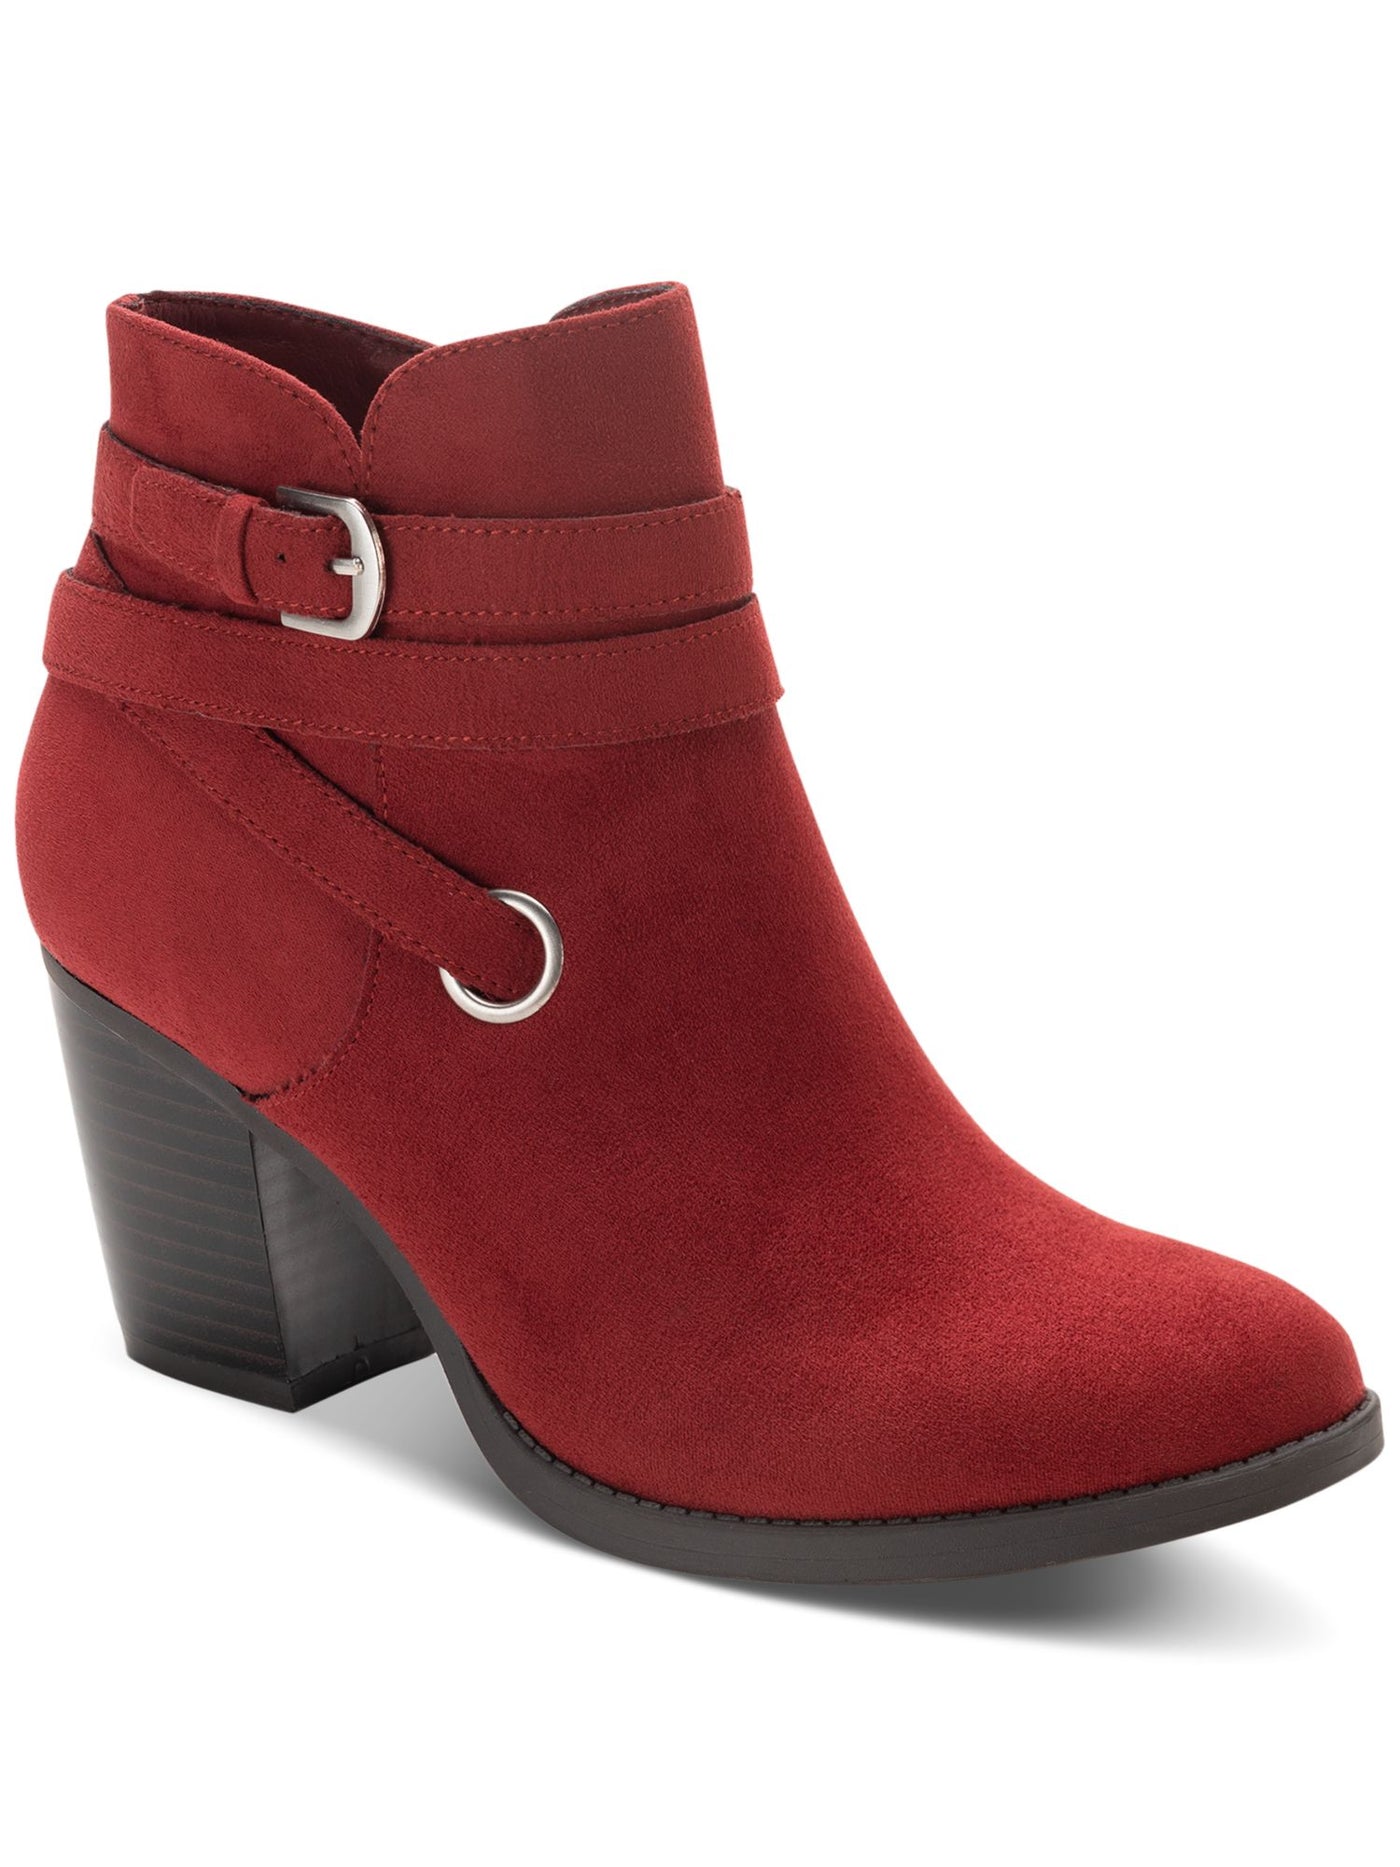 STYLE & COMPANY Womens Red Breathable Wrap-Around Buckled Straps Cushioned Slip Resistant Zolaa Round Toe Block Heel Zip-Up Booties 11 M